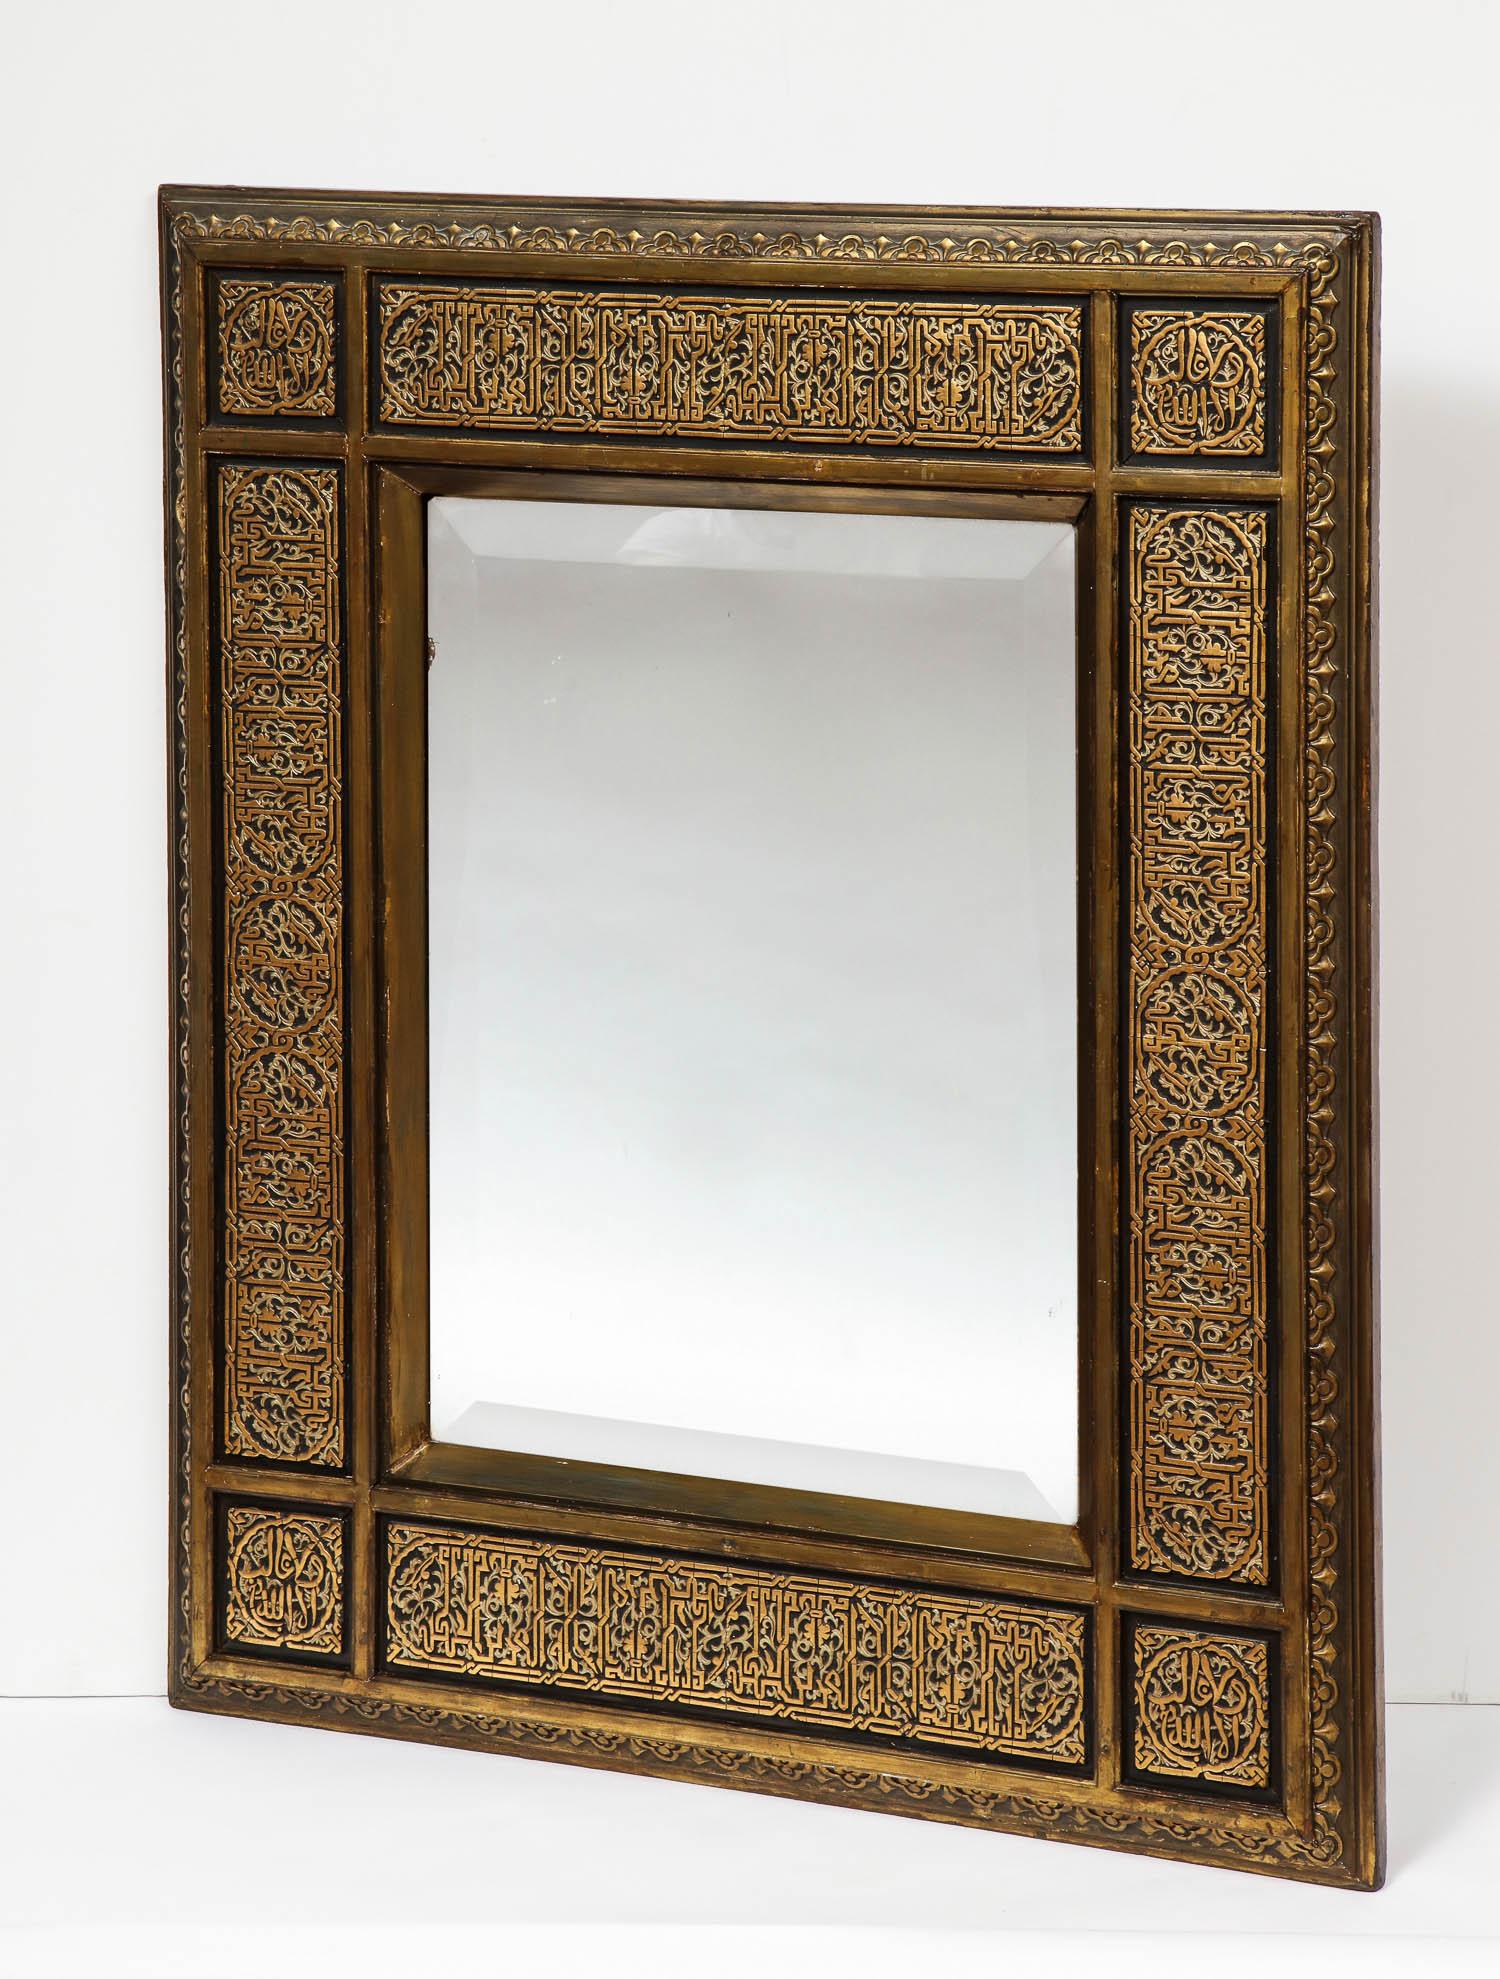 A rare and large Islamic / orientalist calligraphy hand carved mirror / frame,
circa 1900

Ebonized wood, silver leaf, and gold leaf giltwood. 

This fantastic mirror / frame was hand carved by a master calligrapher with kufic and arabic